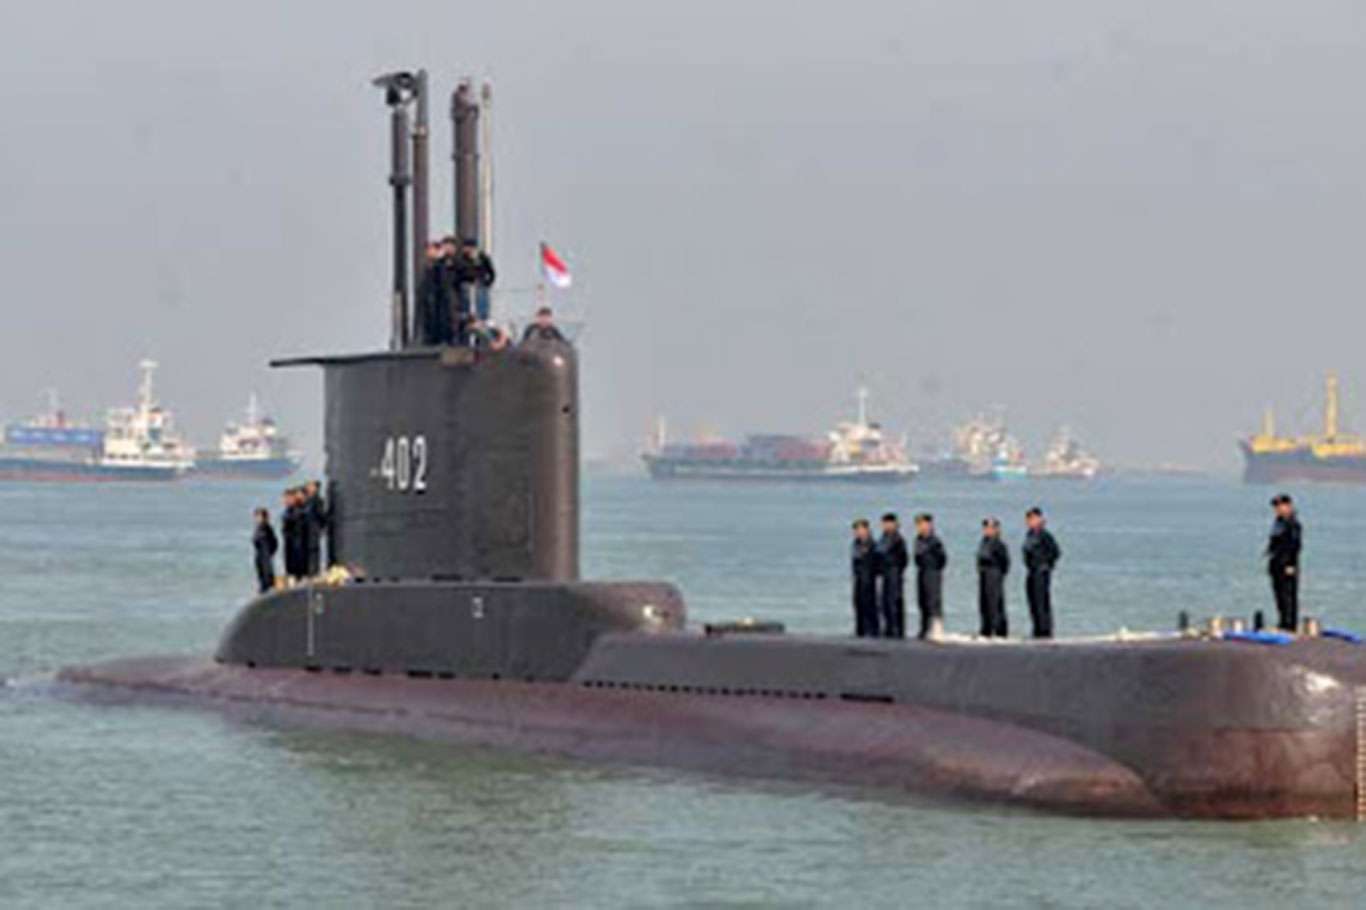 Indonesia's military lost contact with a navy submarine